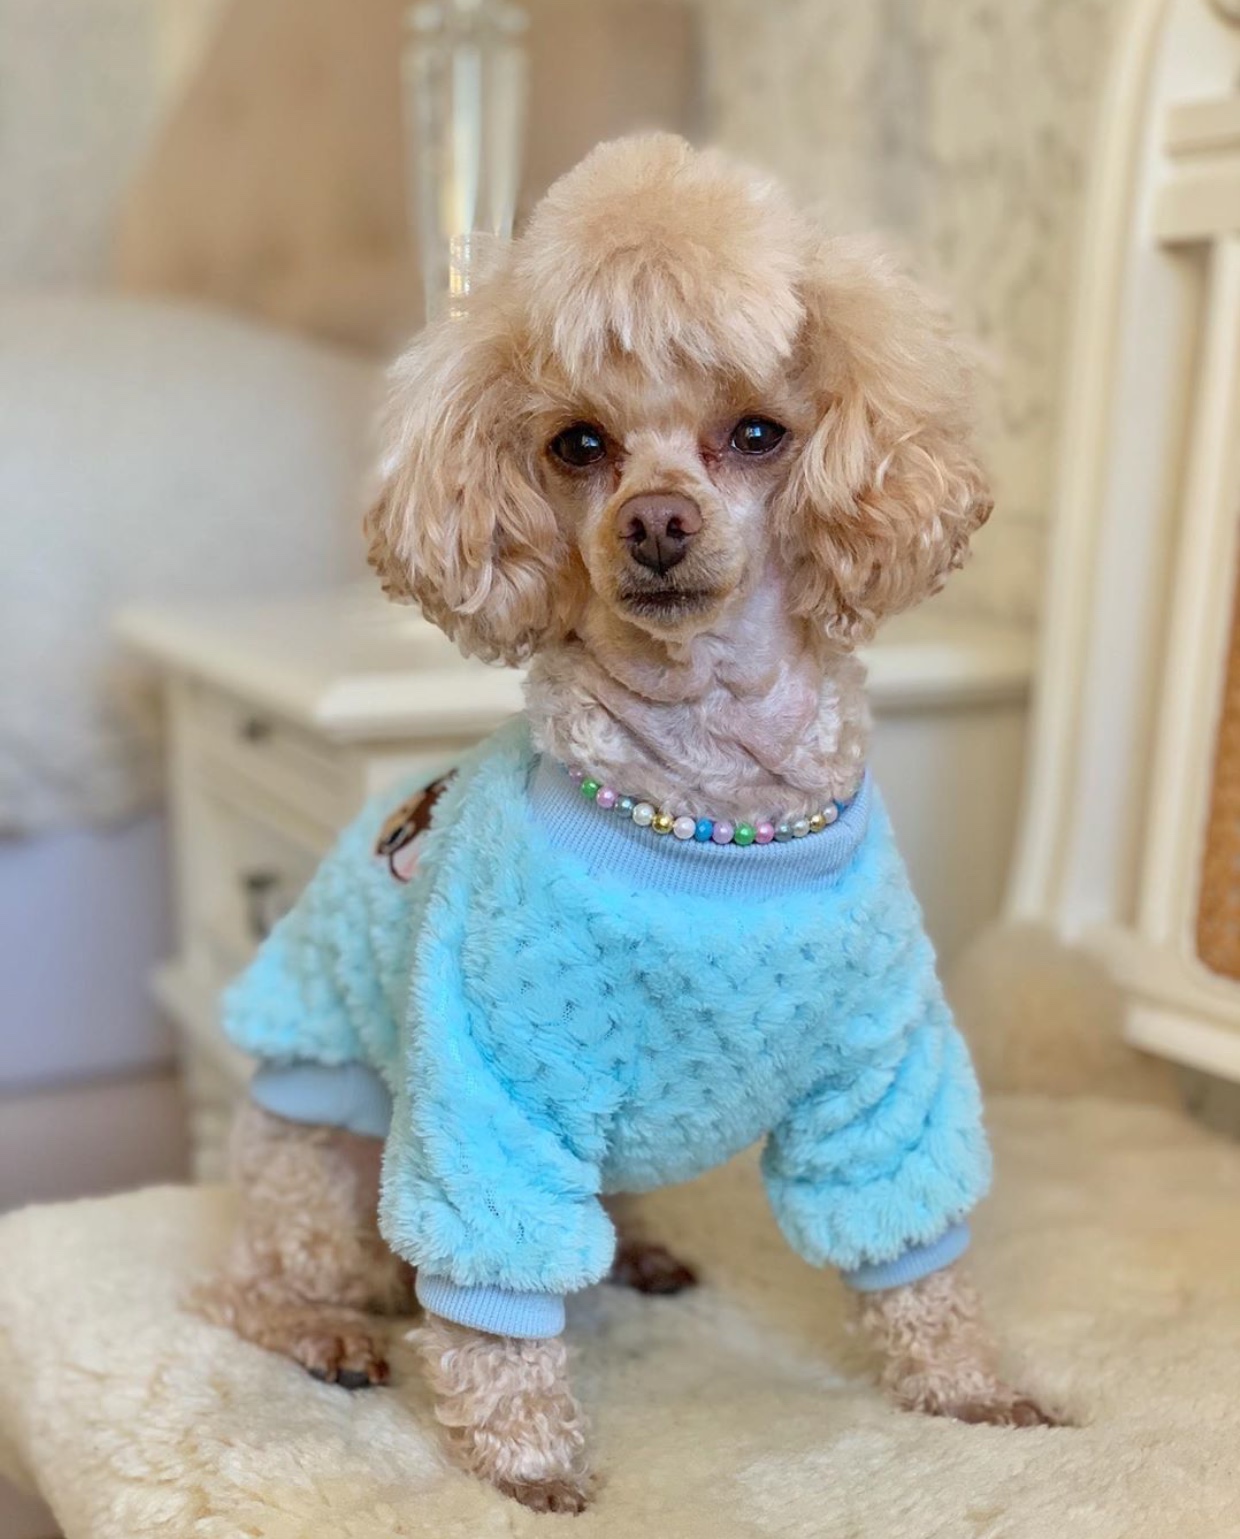 A cream Poodle wearing a blue sweater while sitting on the chair